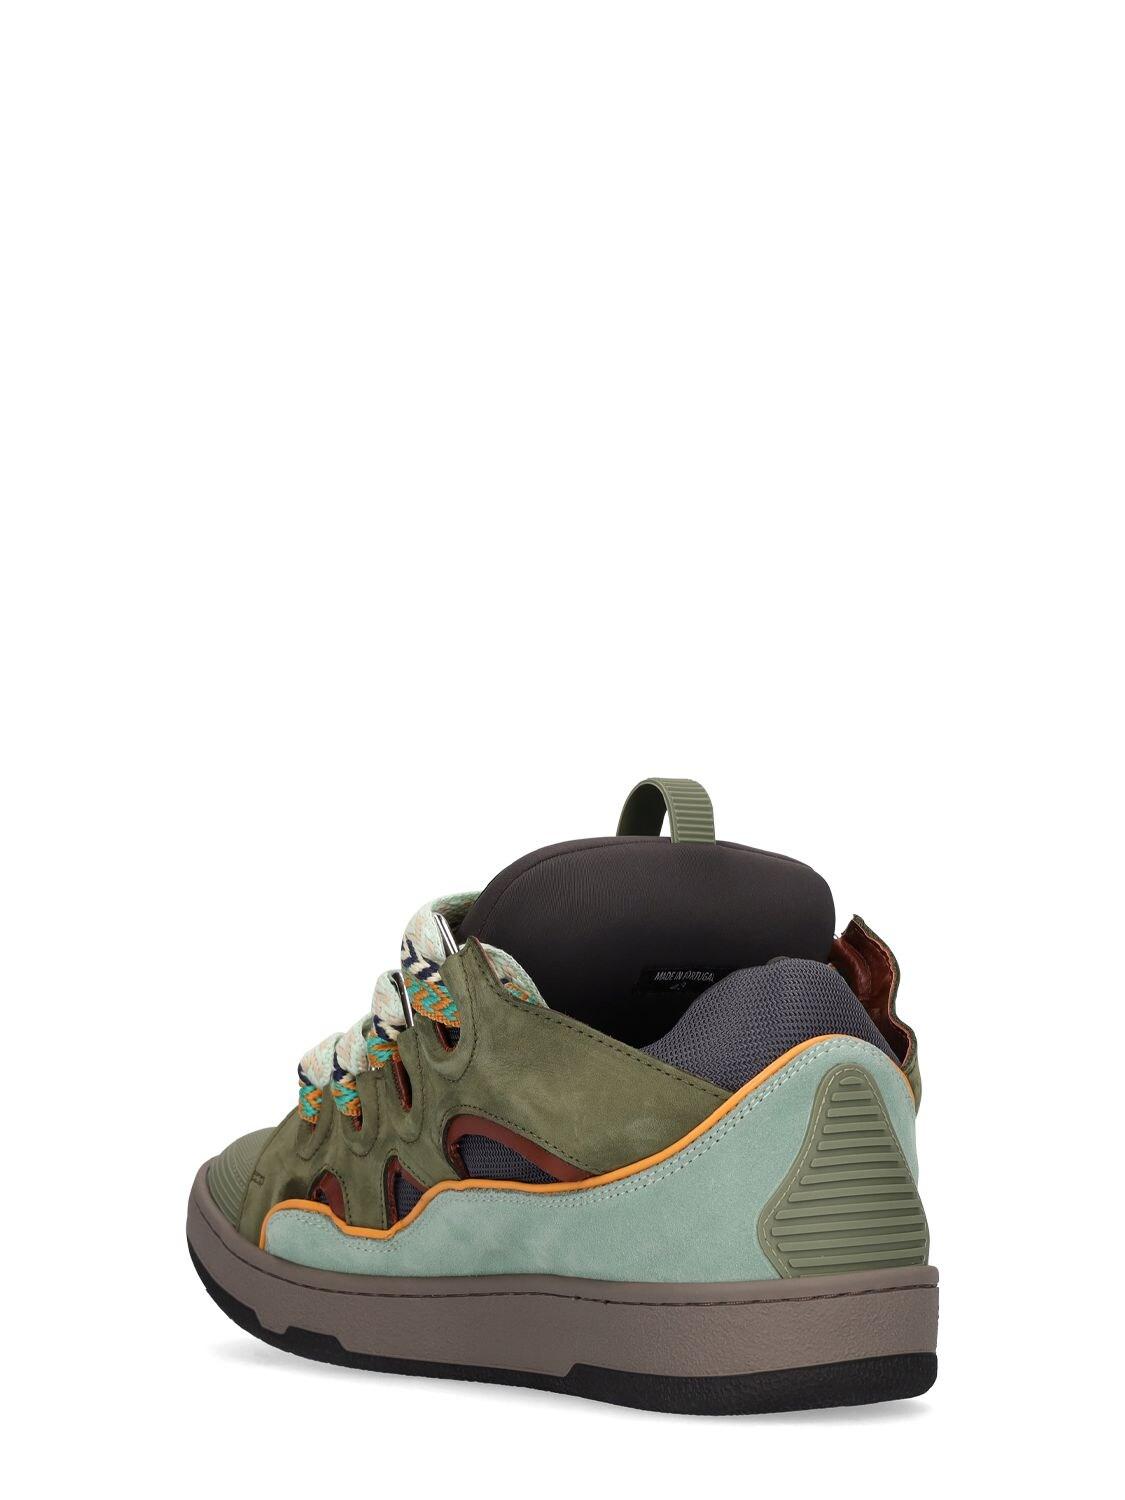 Lanvin Curb Leather Sneakers in Green for Men | Lyst UK